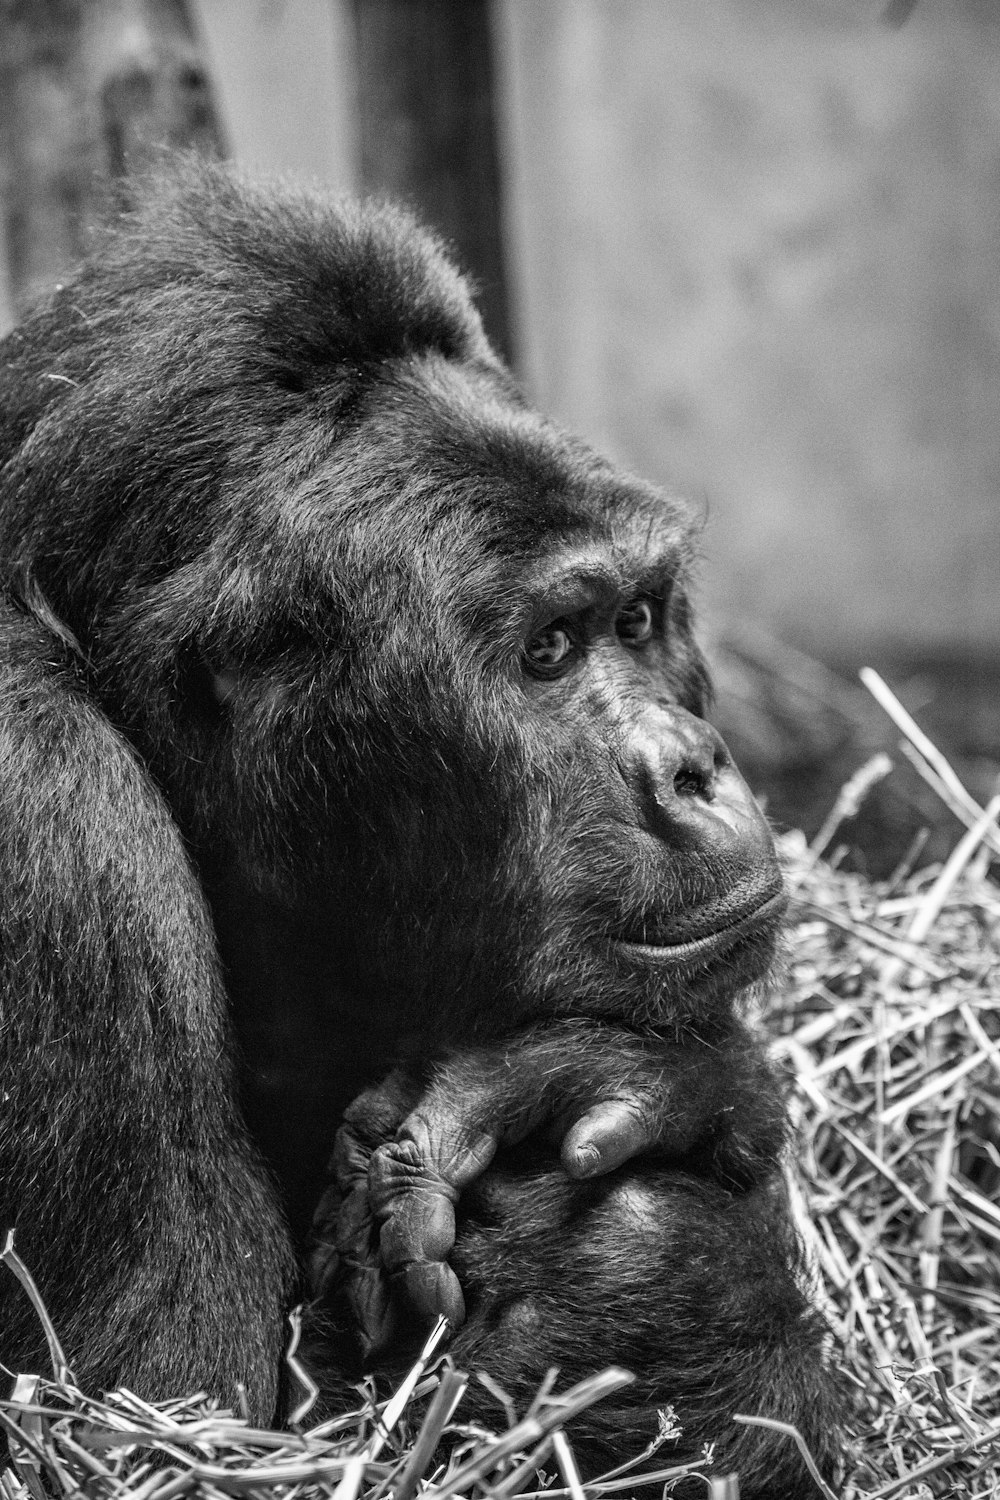 grayscale photography of gorilla